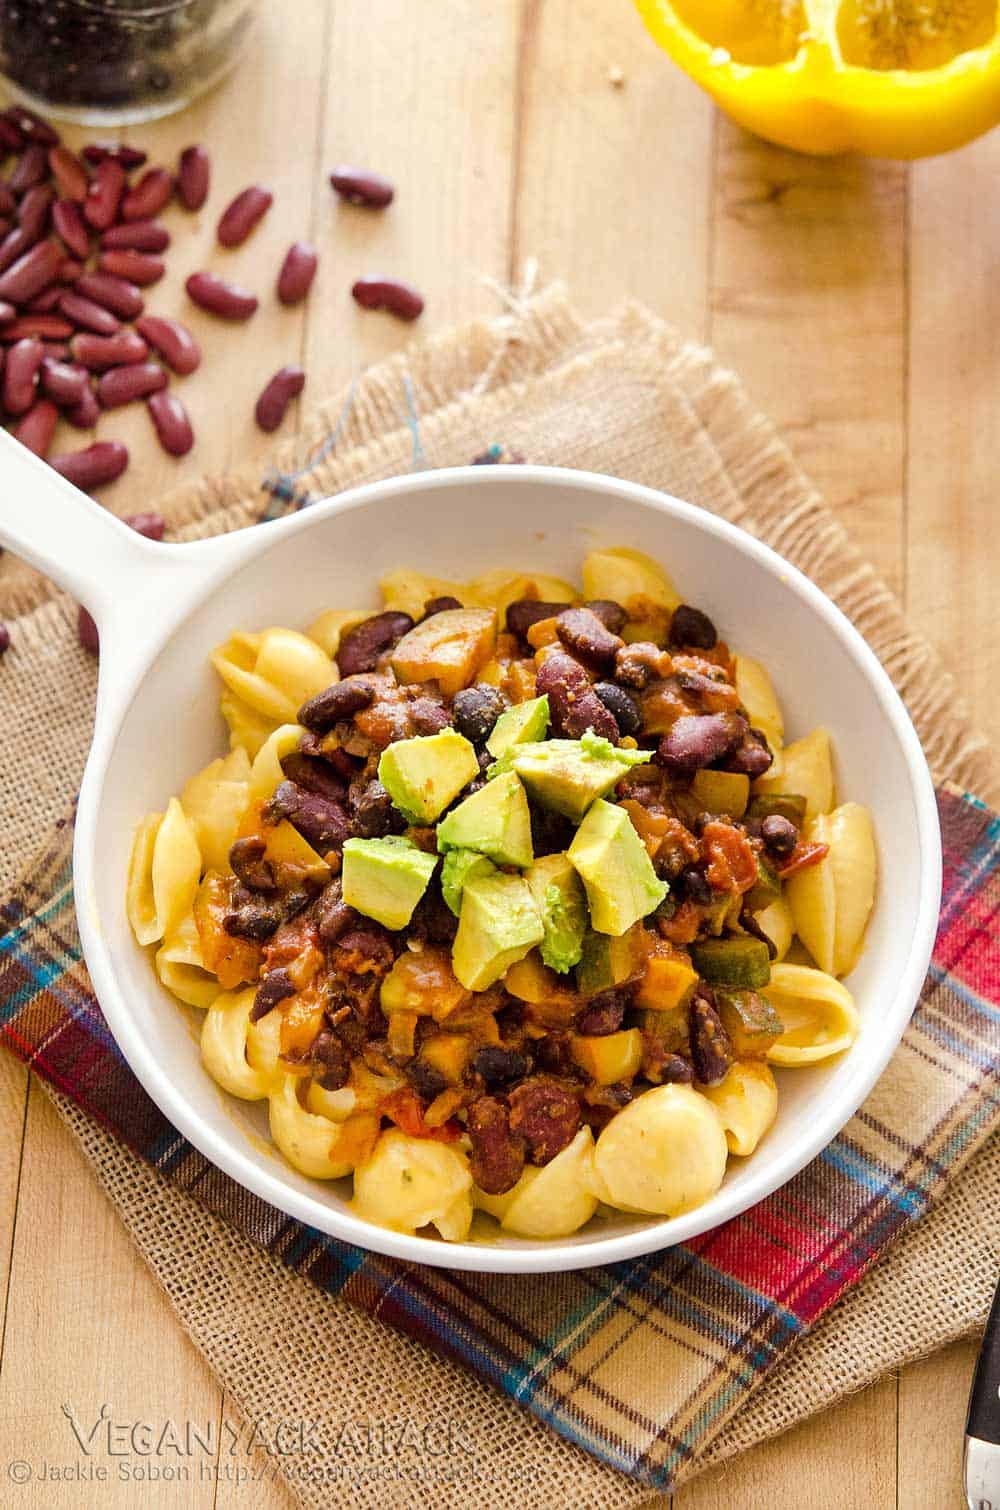 Image of Vegan Chili Mac and Cheese on linens, with loose beans in the background